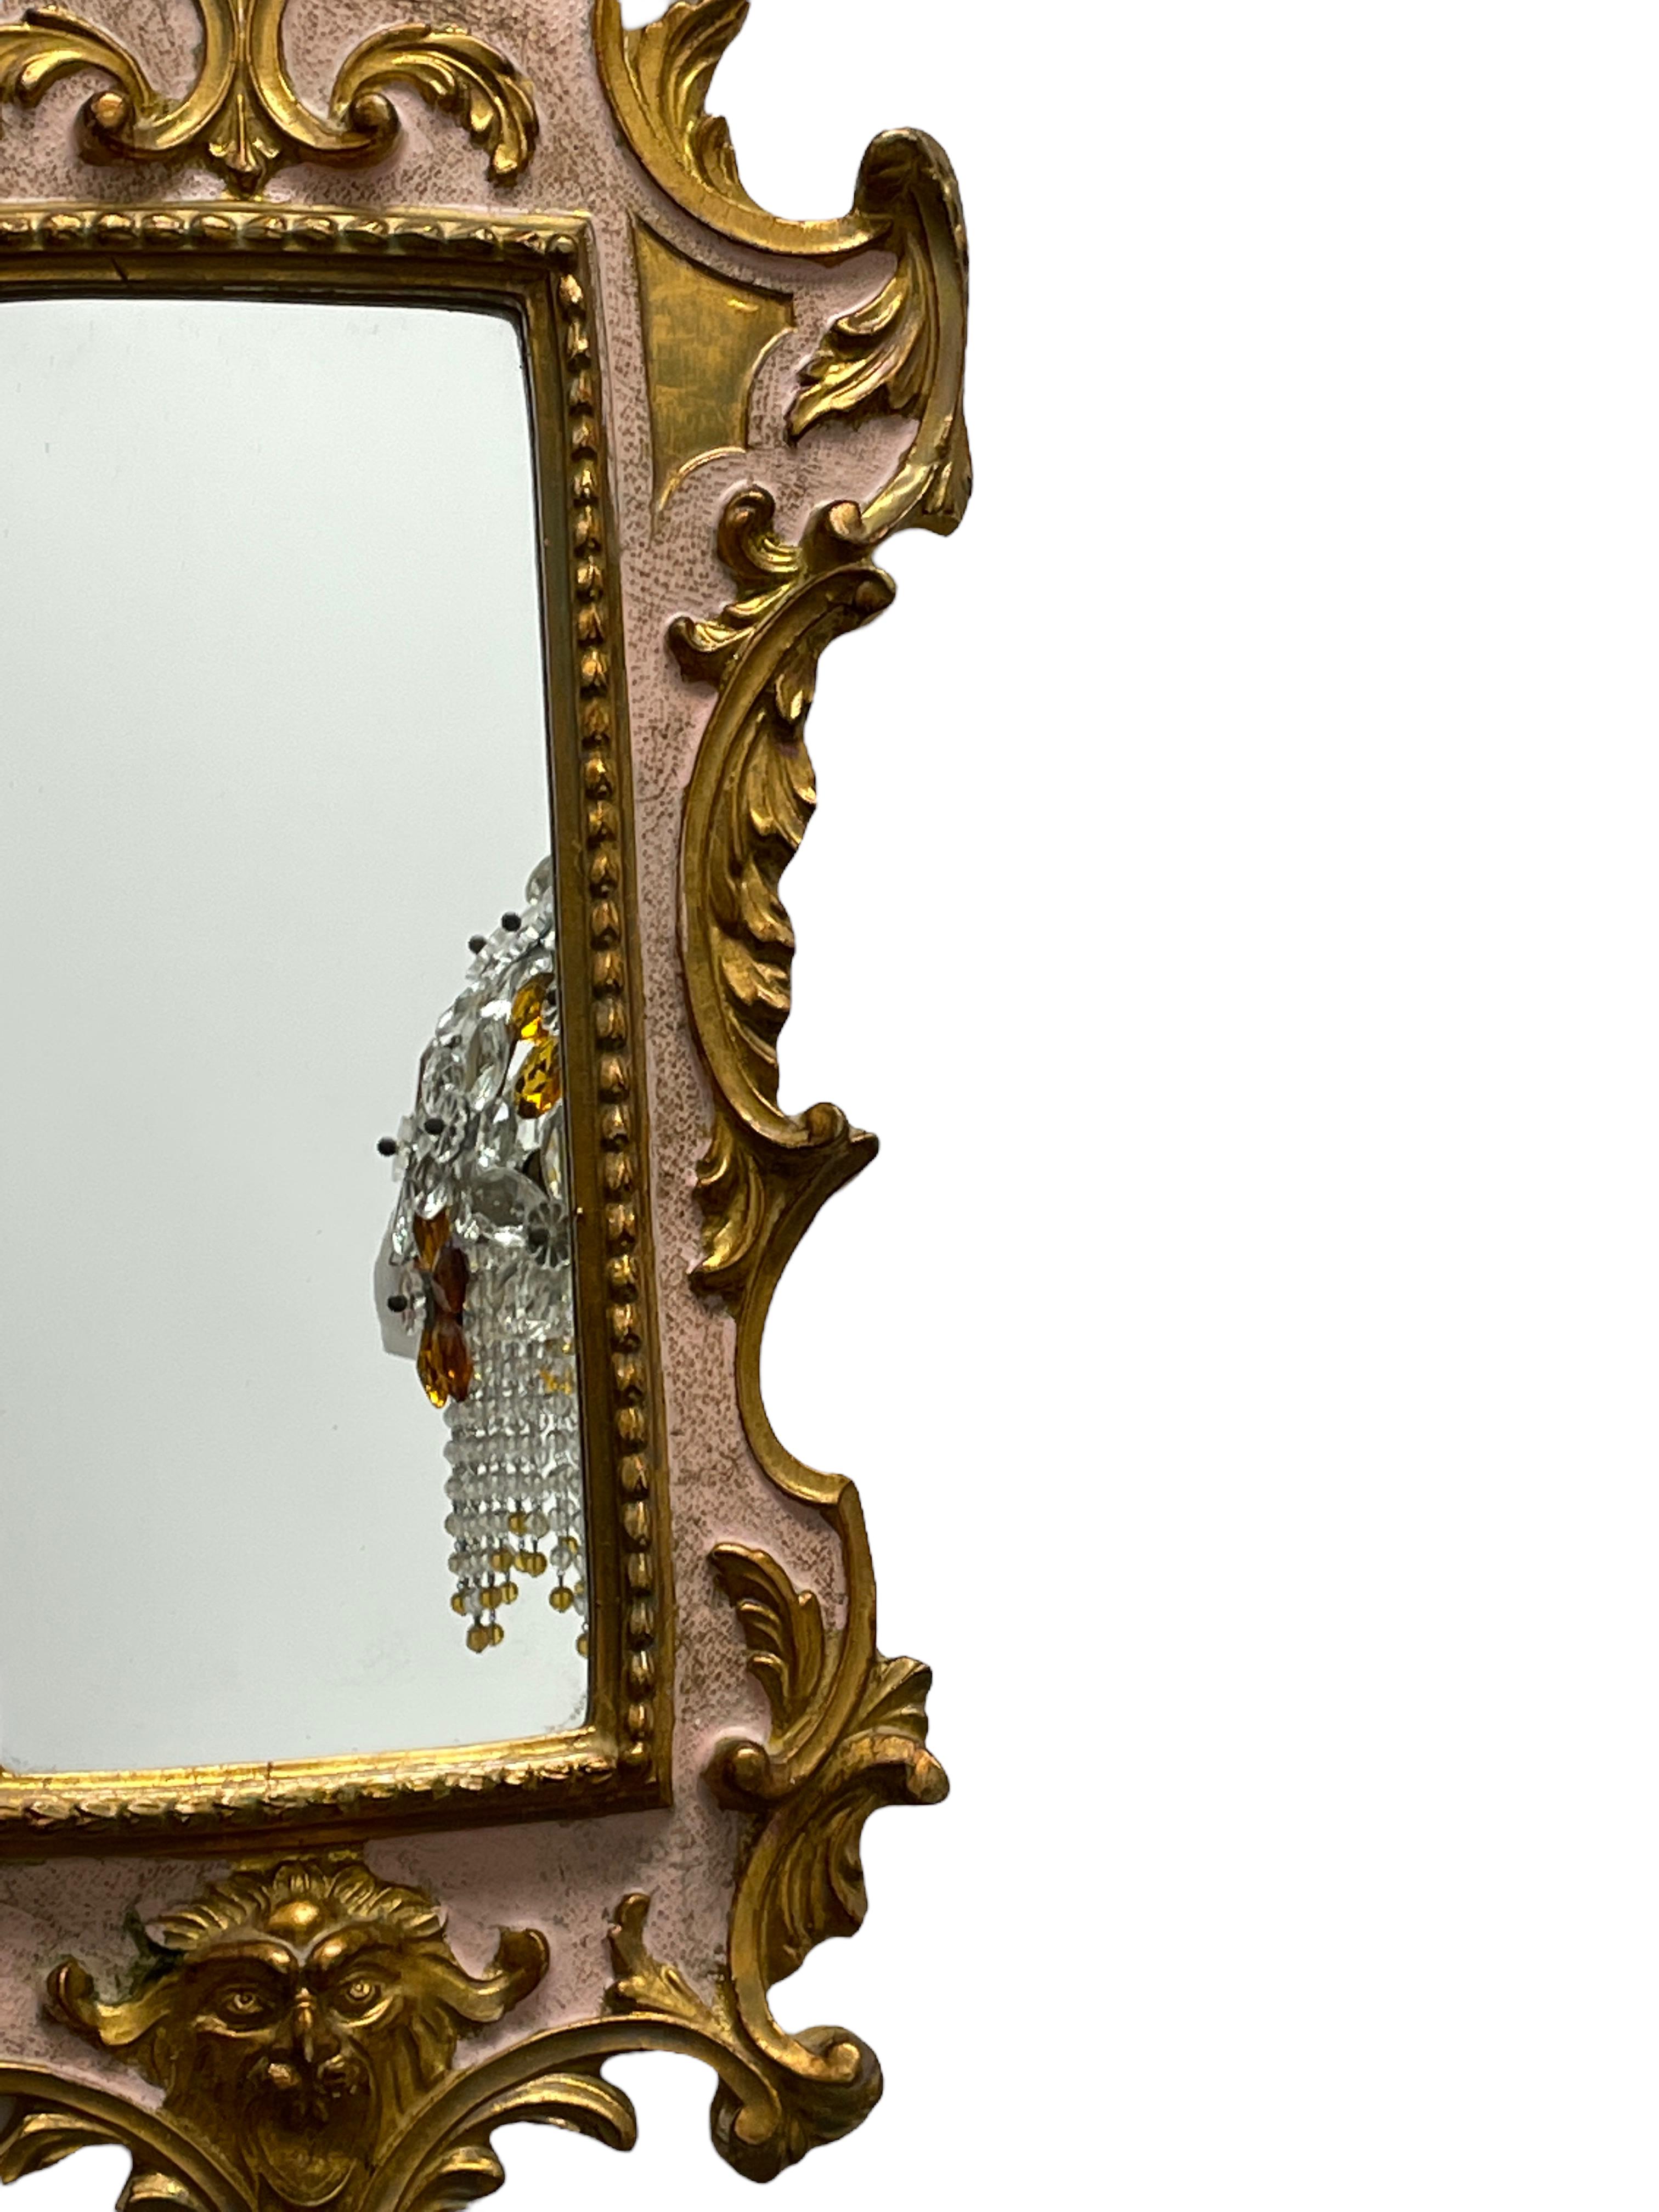 Beautiful Stunning Ornate Tole Toleware Gilded Frame Mirror, Italy Antique 1900s For Sale 1